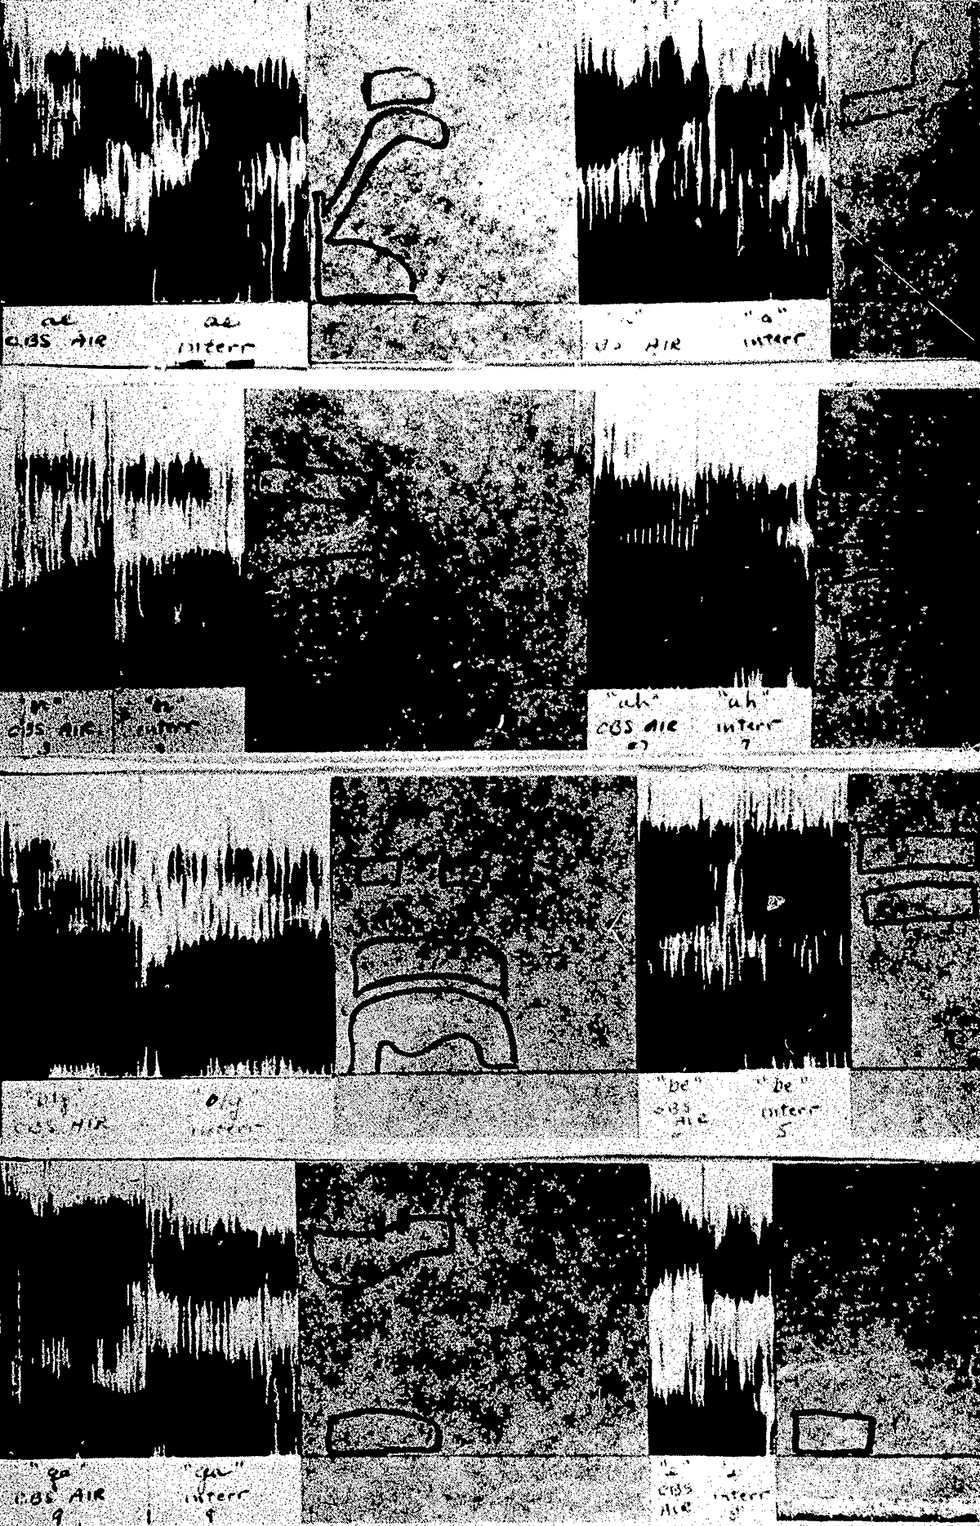 a-variety-of-graphs-depict-spectrograms-